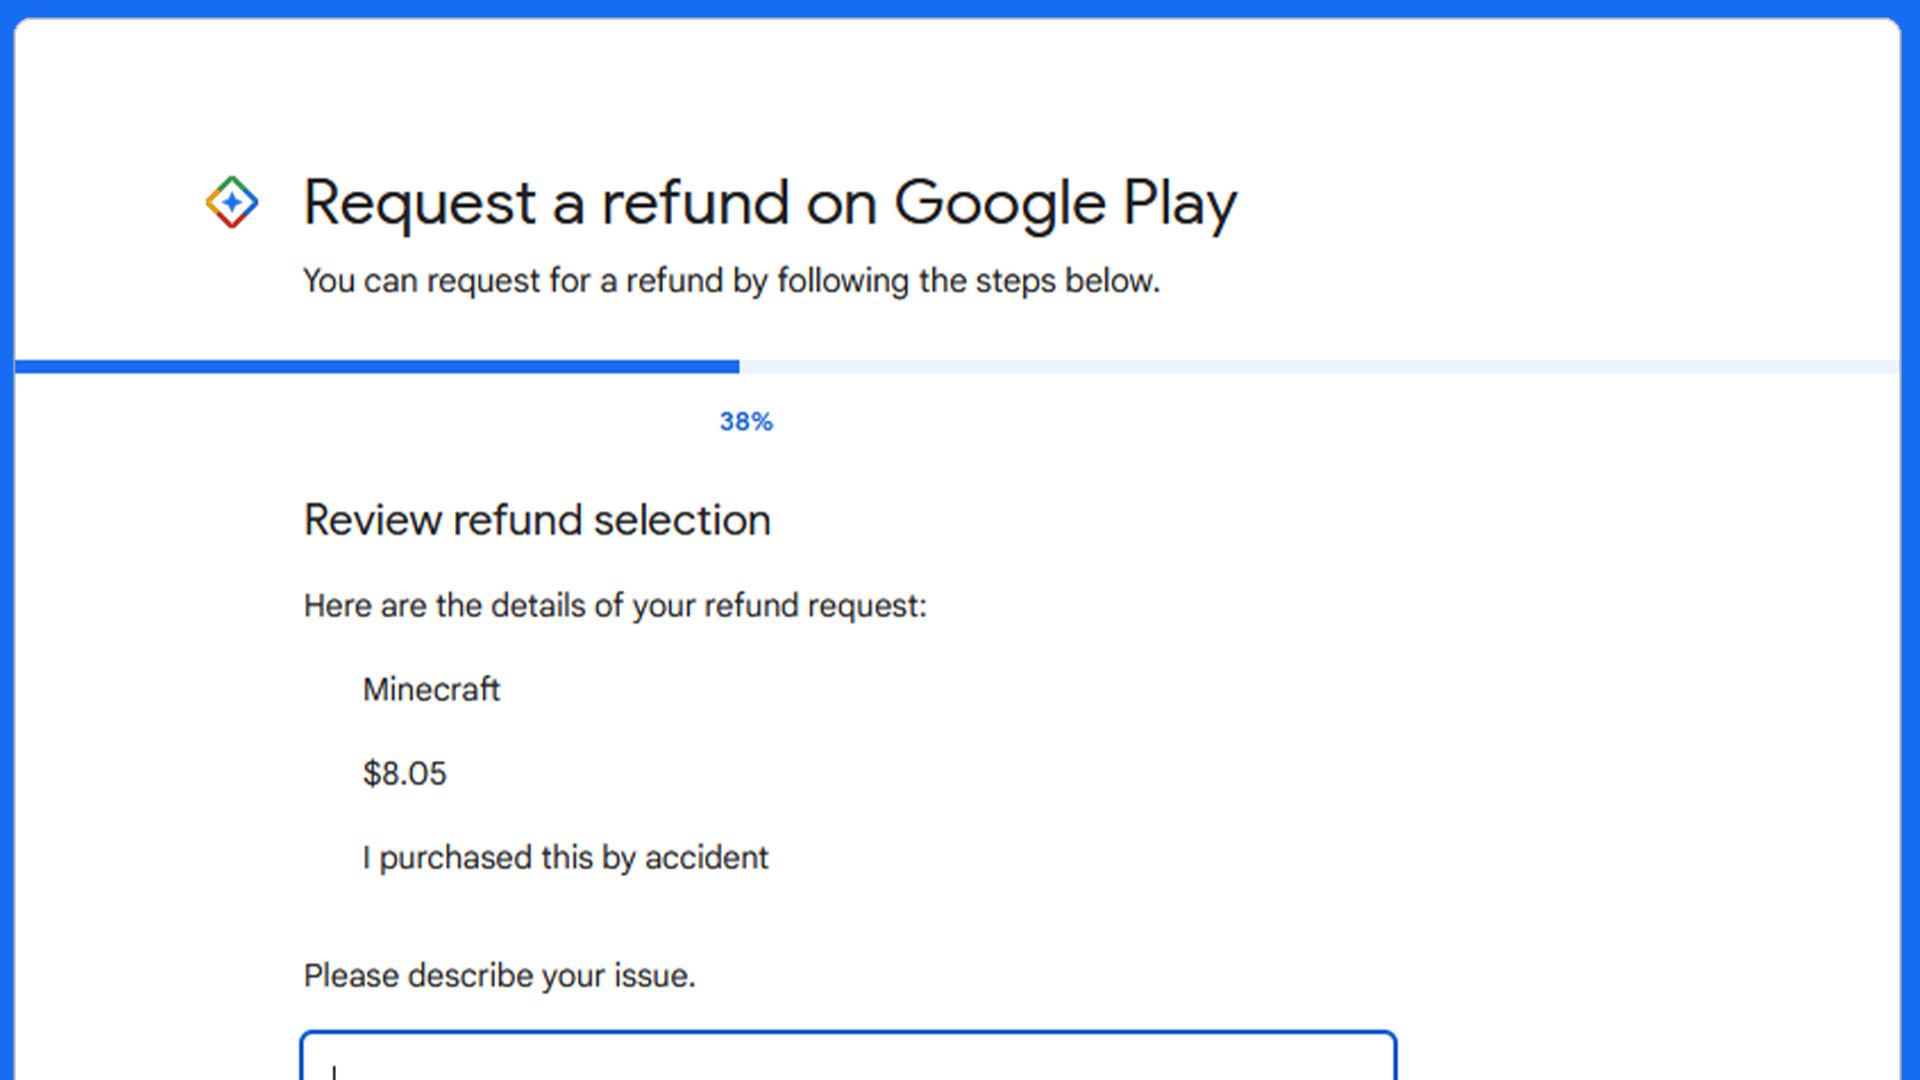 Google Play Request a Refund form